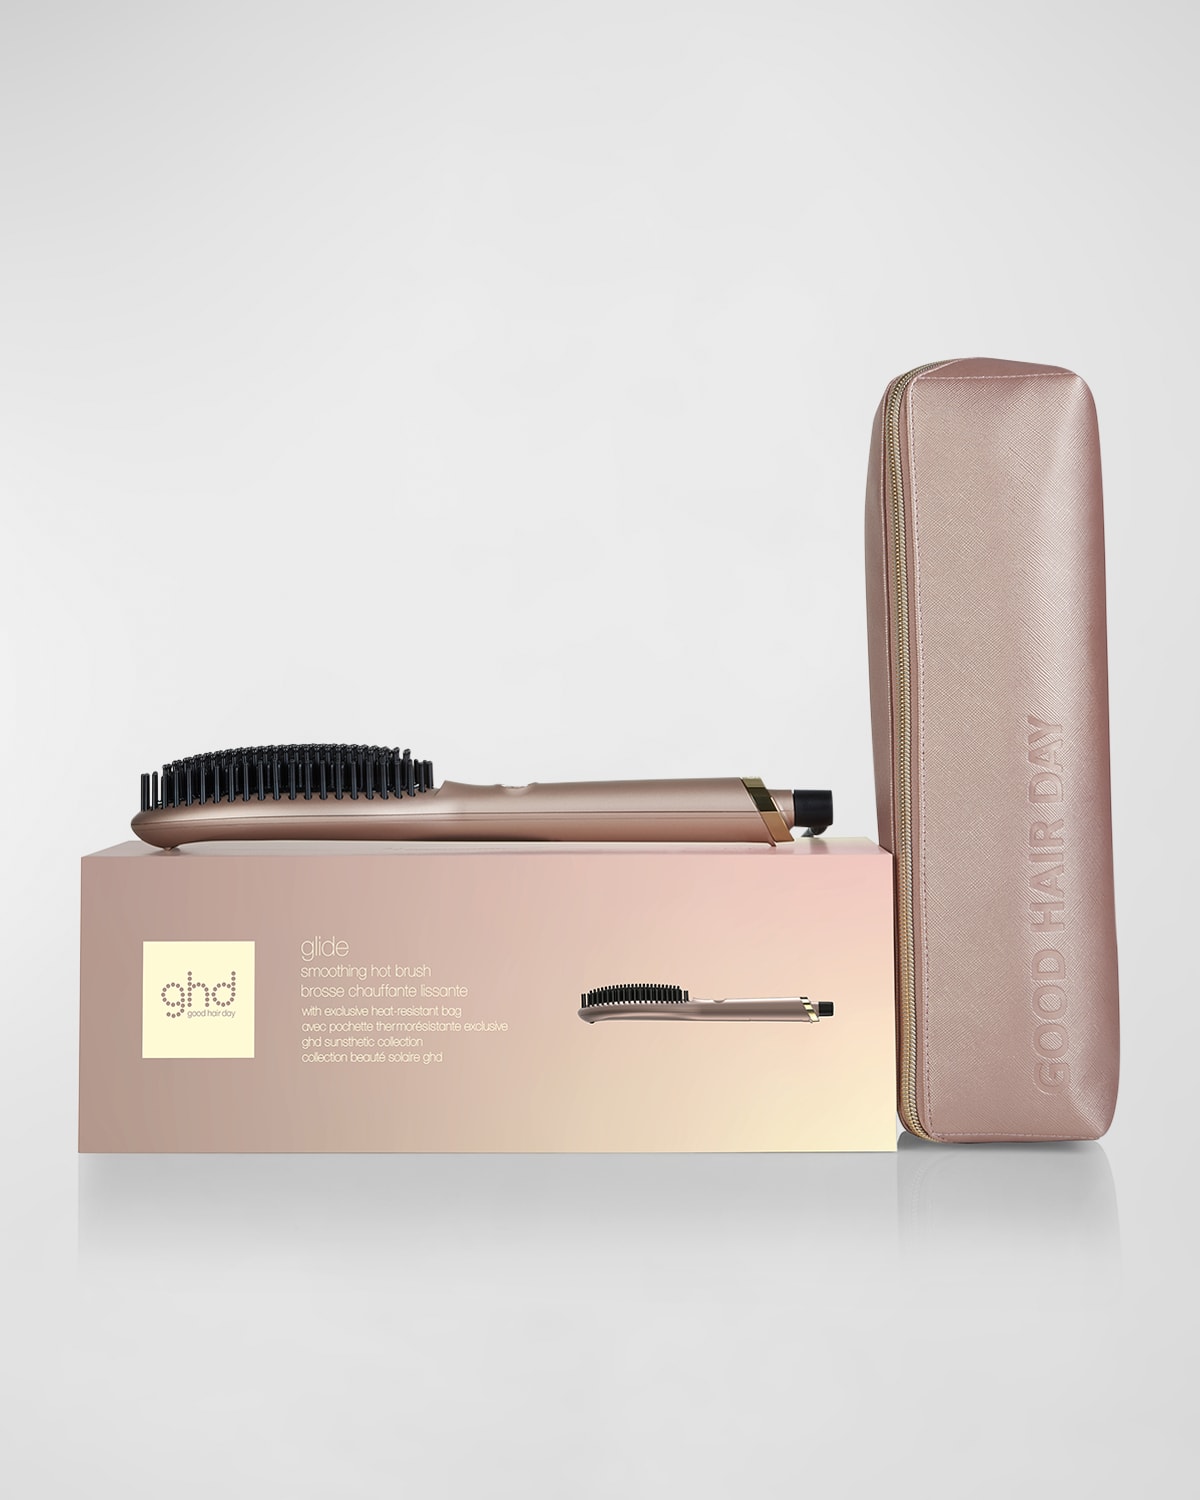 Glide Smoothing Hot Brush, Limited Edition Sun-Kissed Bronze